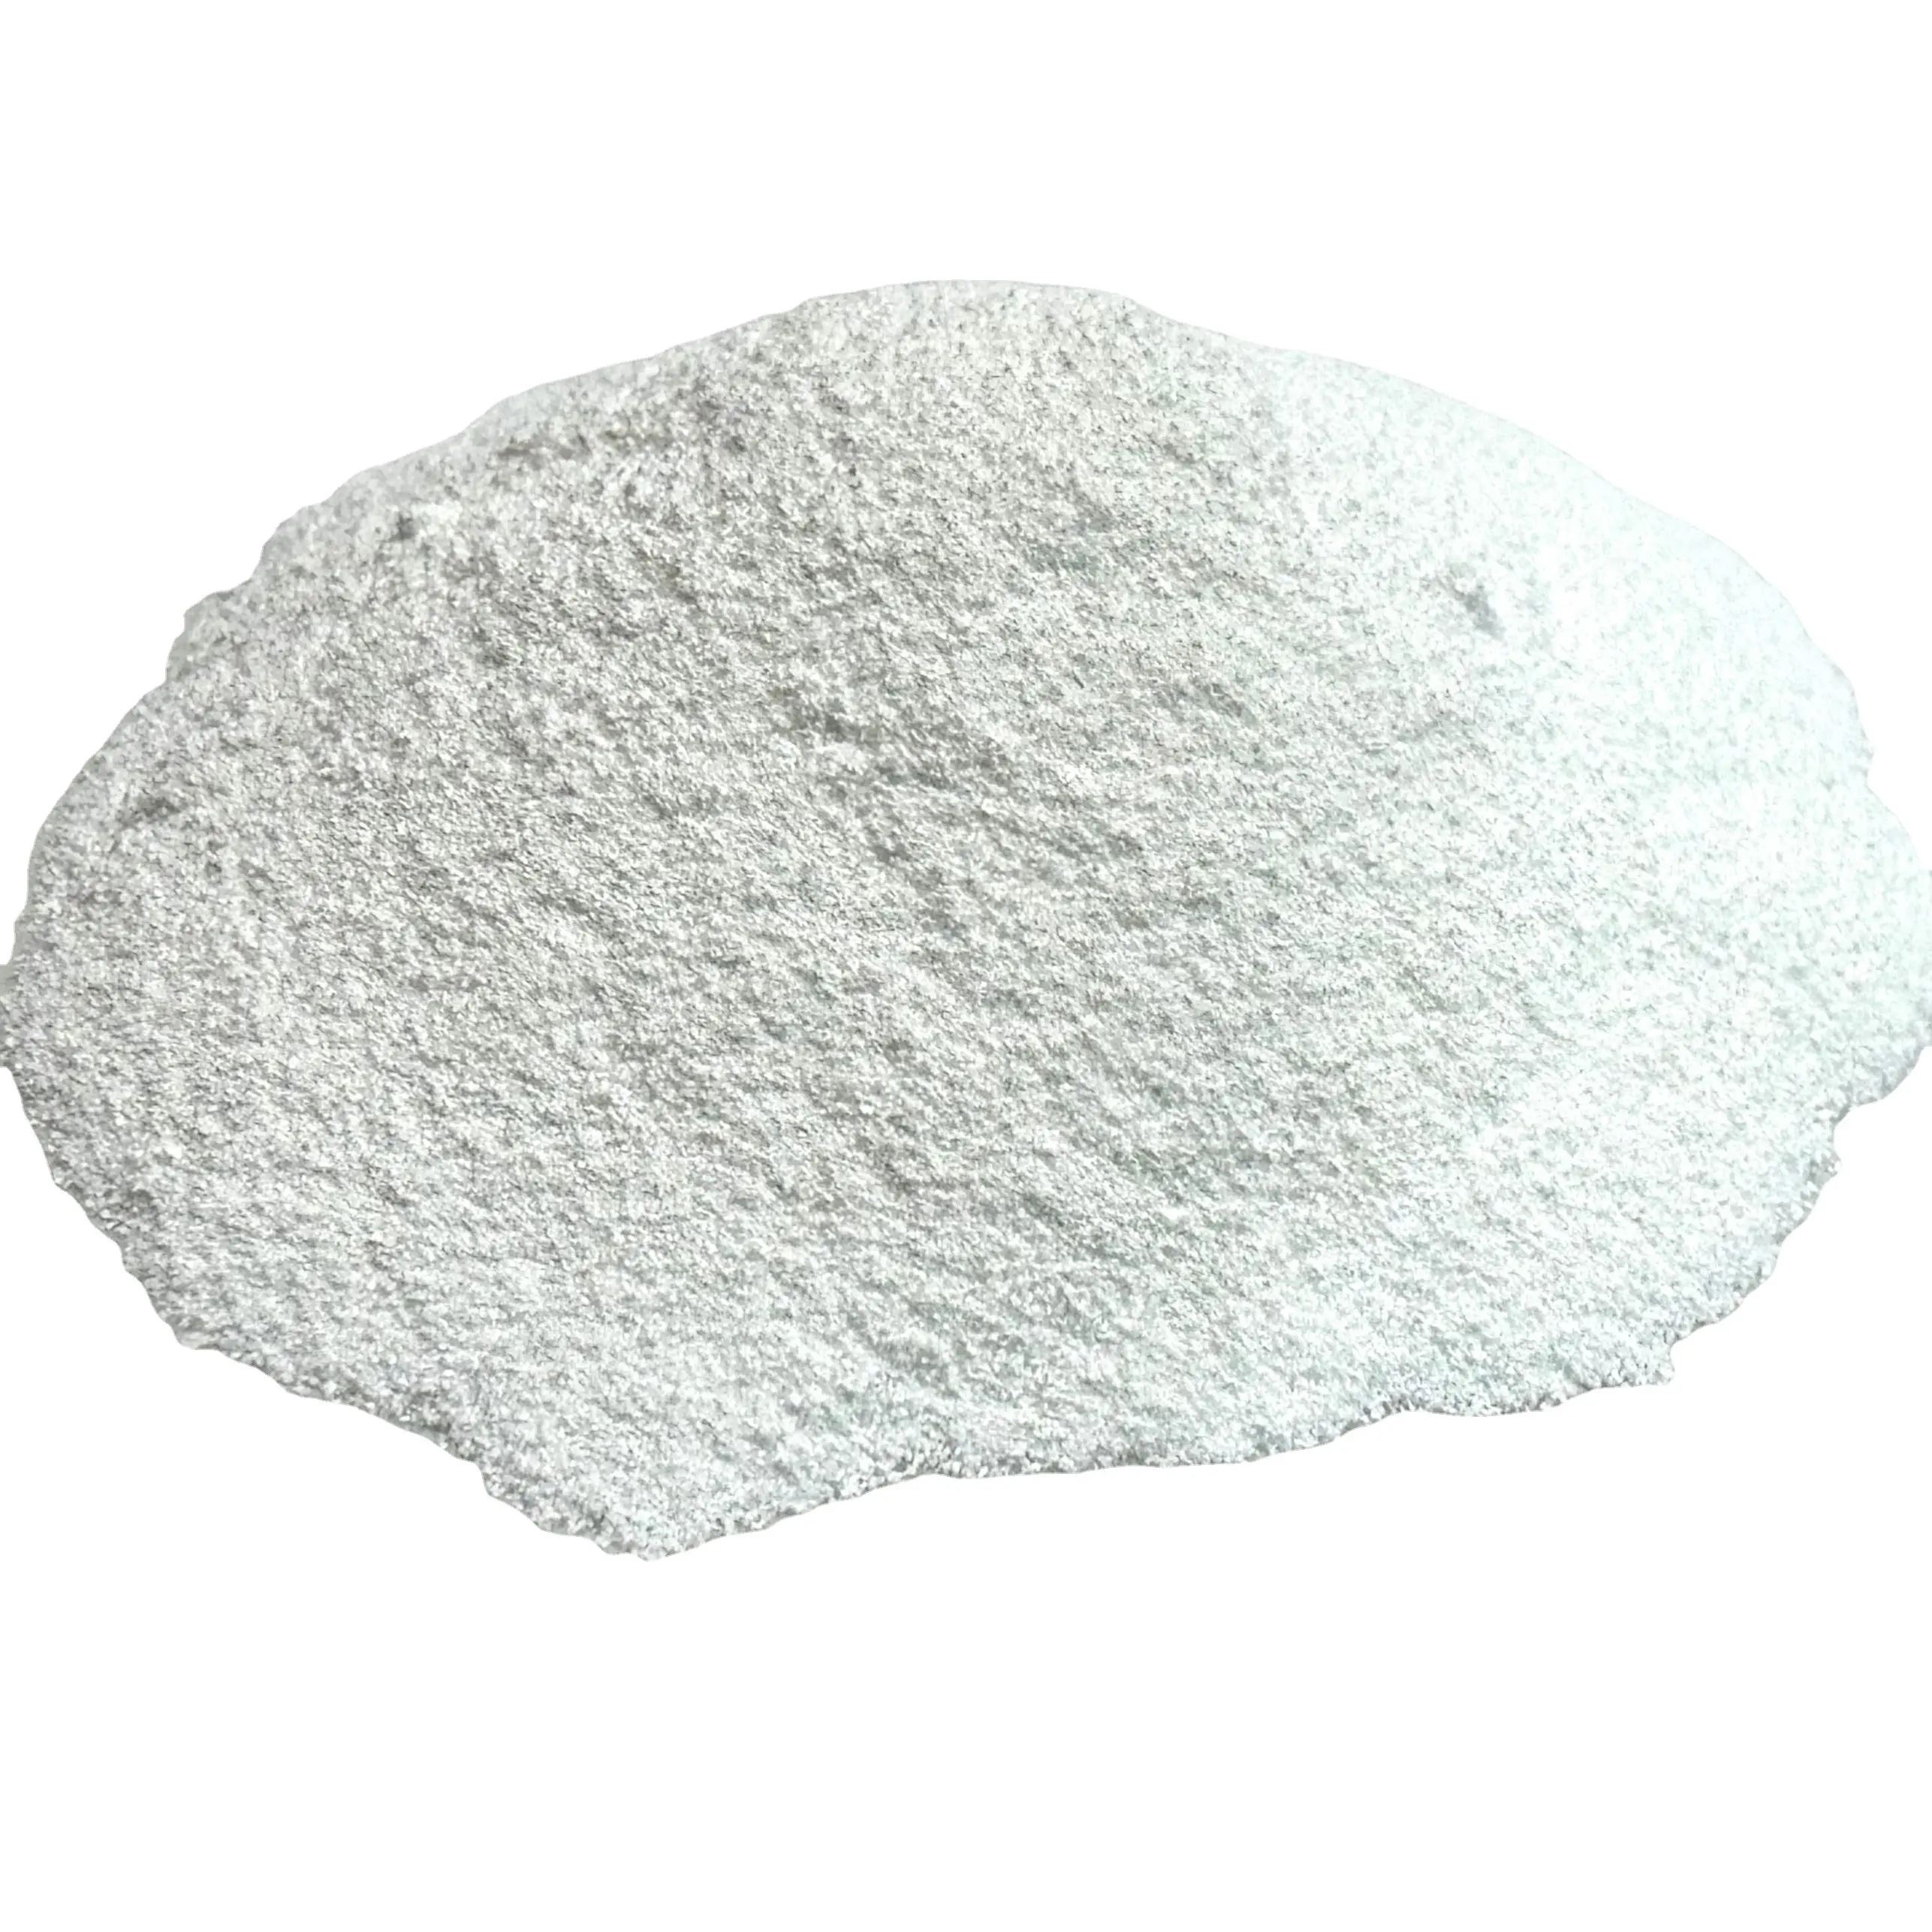 ODM OEM Colorless Polyimide powder CPI powder CPI powder for wearable electronic device